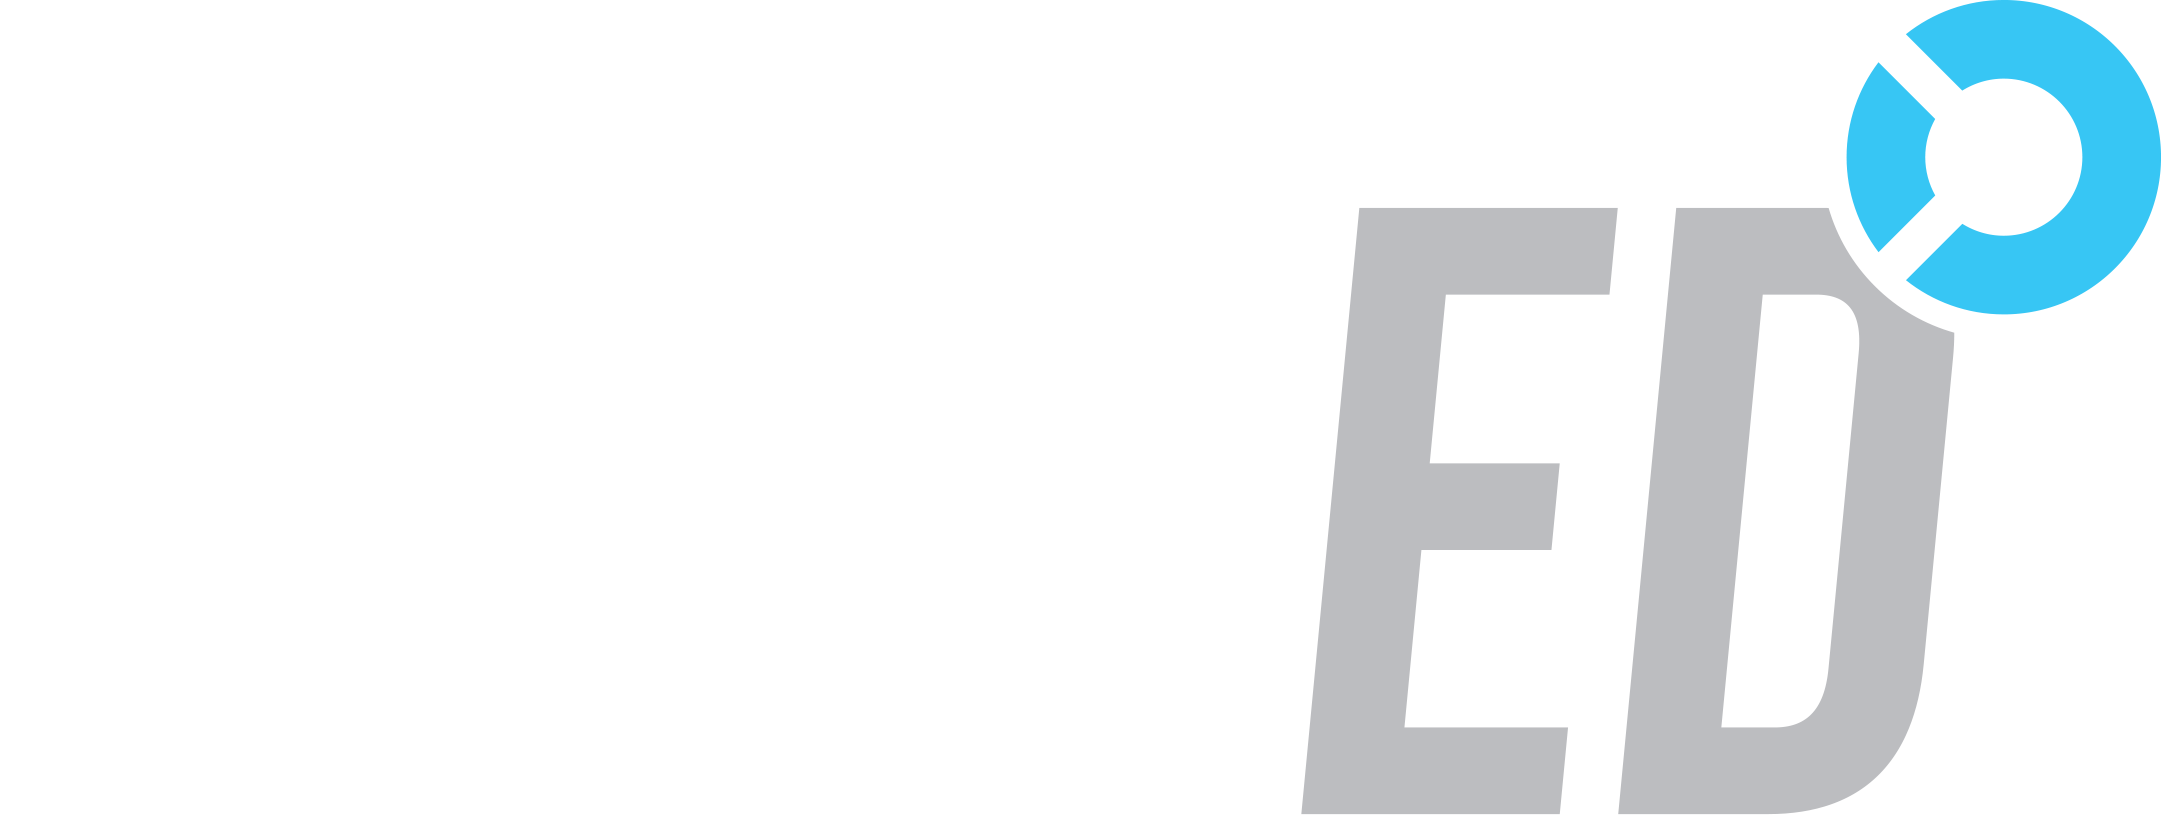 TechEd Logo